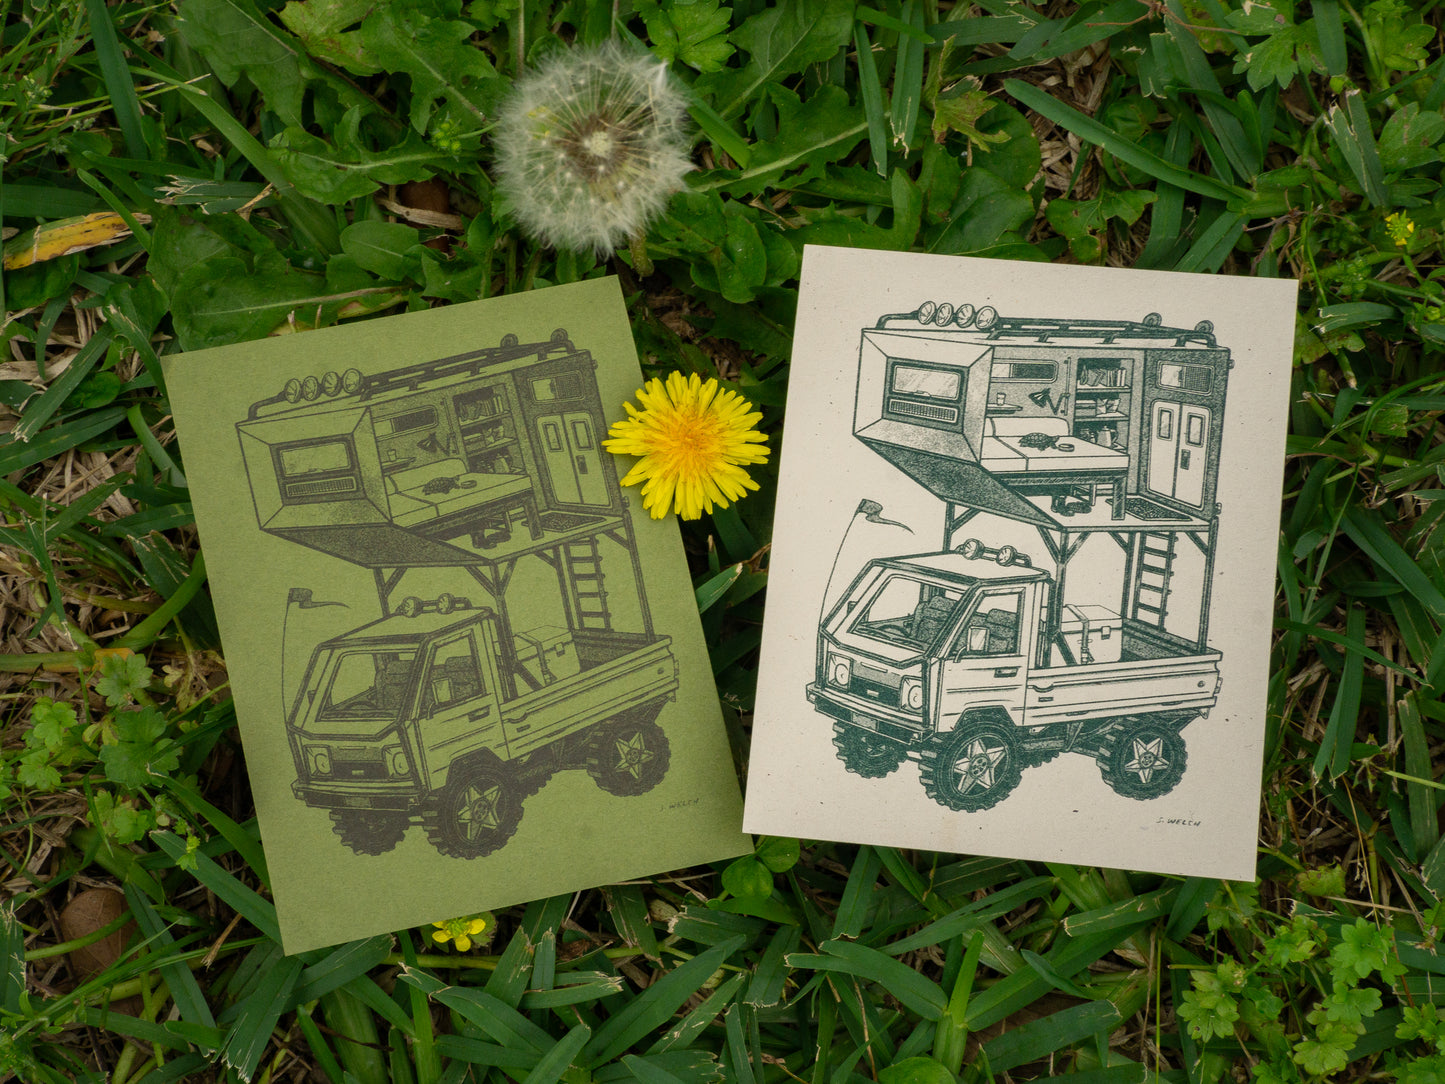 Japanese fantasy kei truck illustration on green and taupe papers.